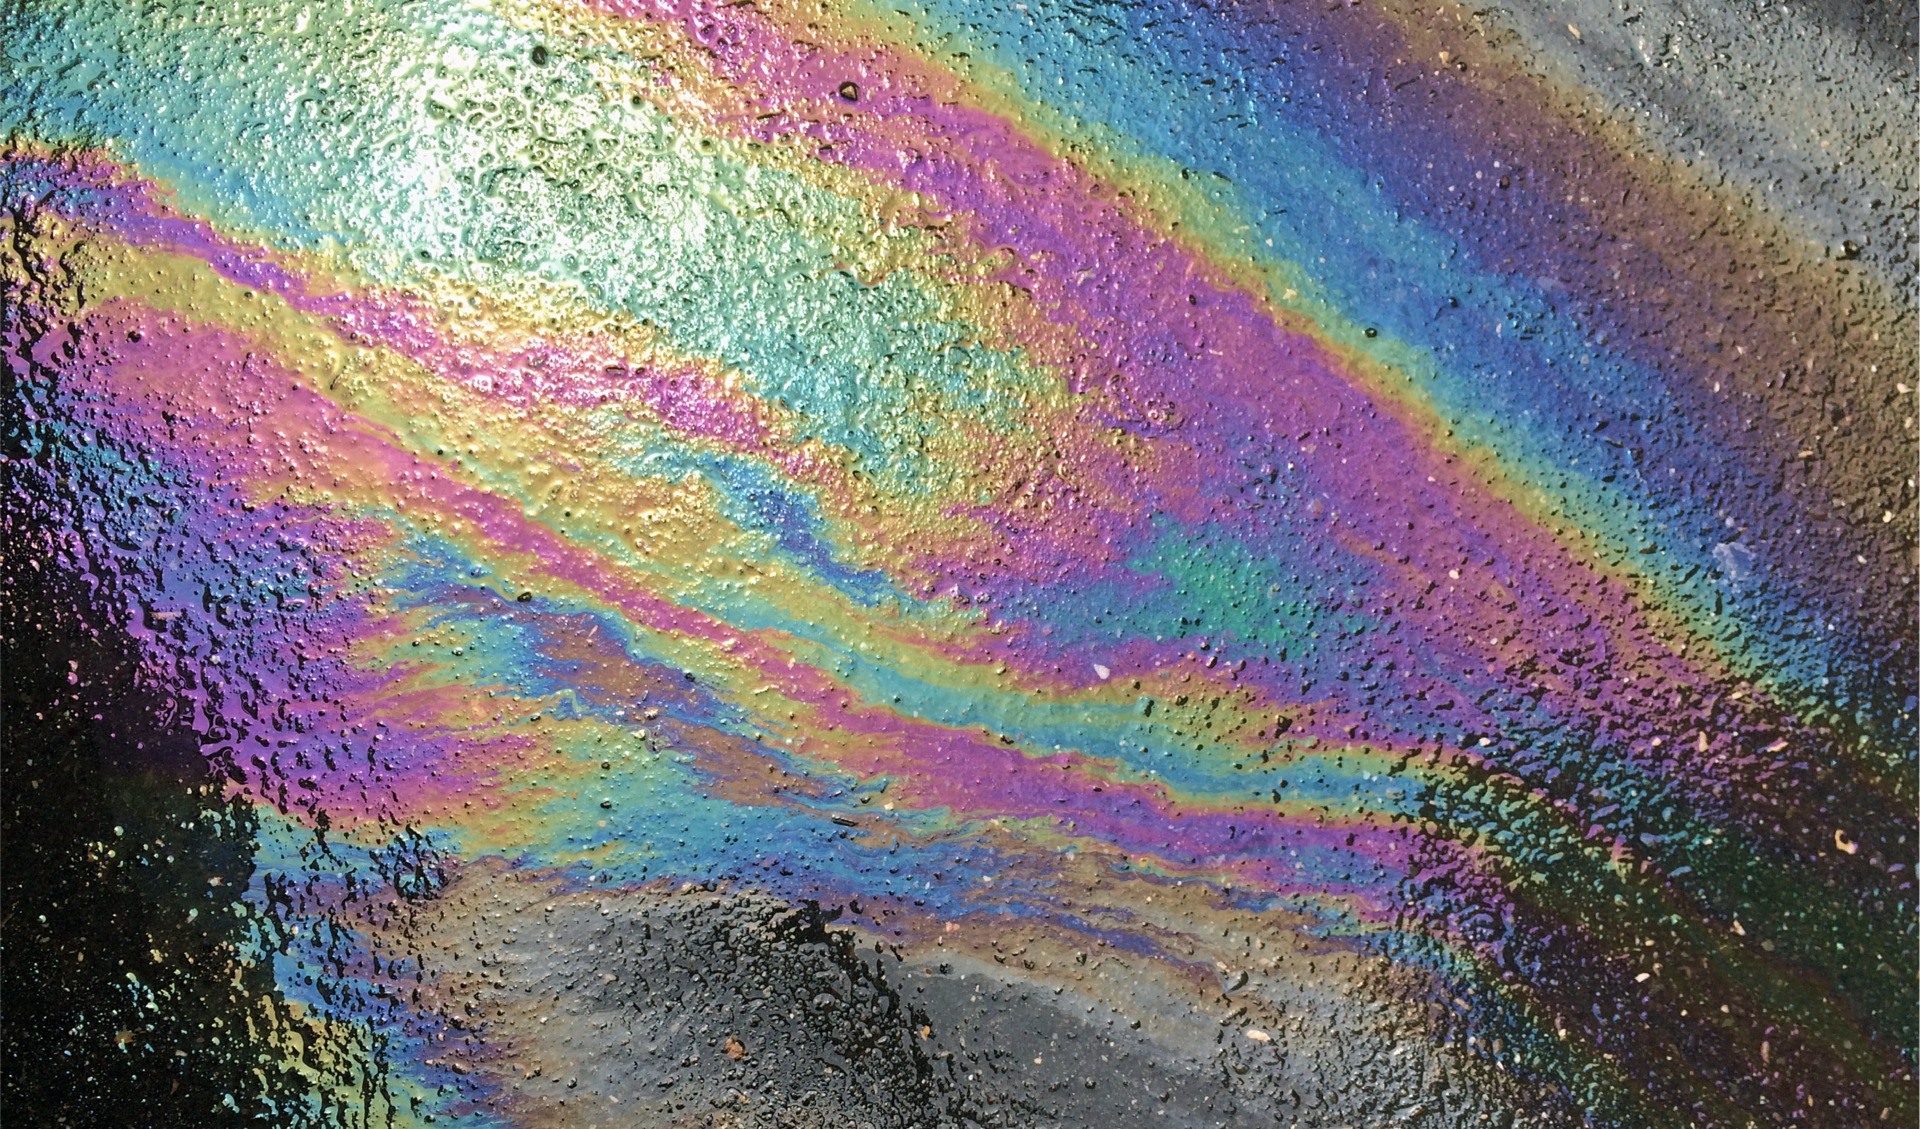 Is Your Business Prepared for an Oil Spill?